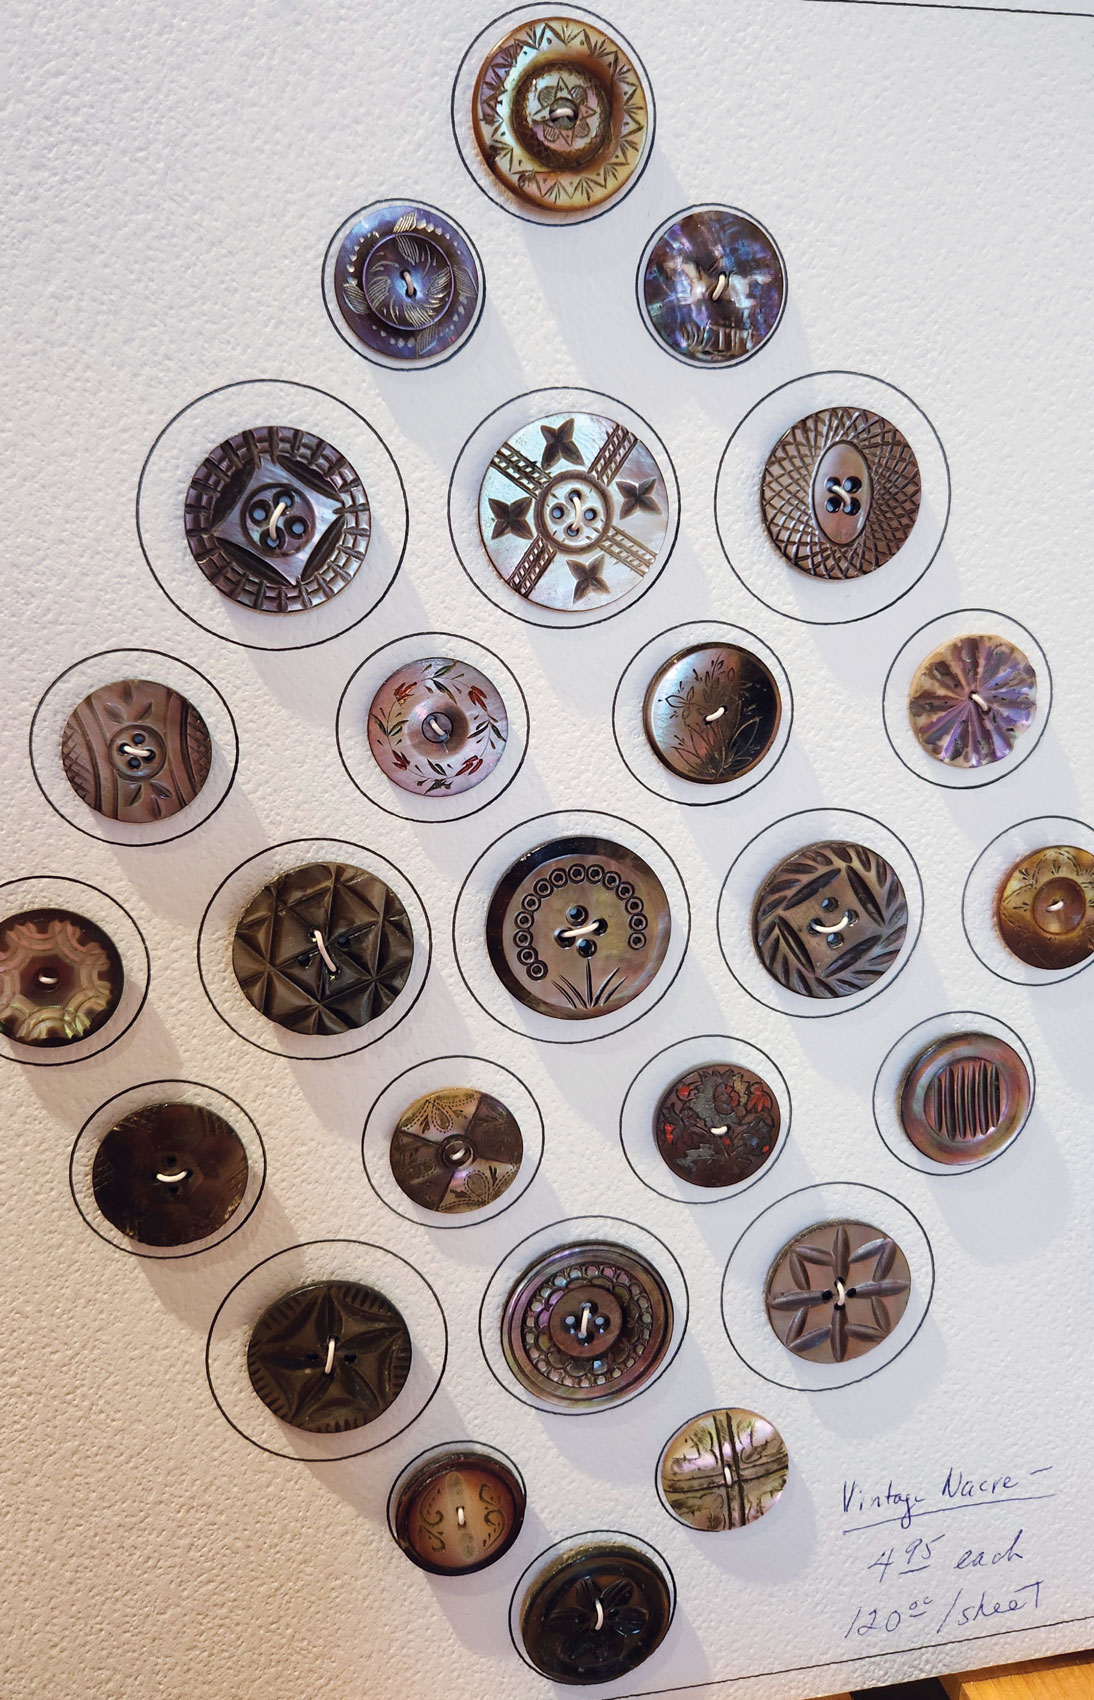 Vintage nacre buttons - mother of pearl